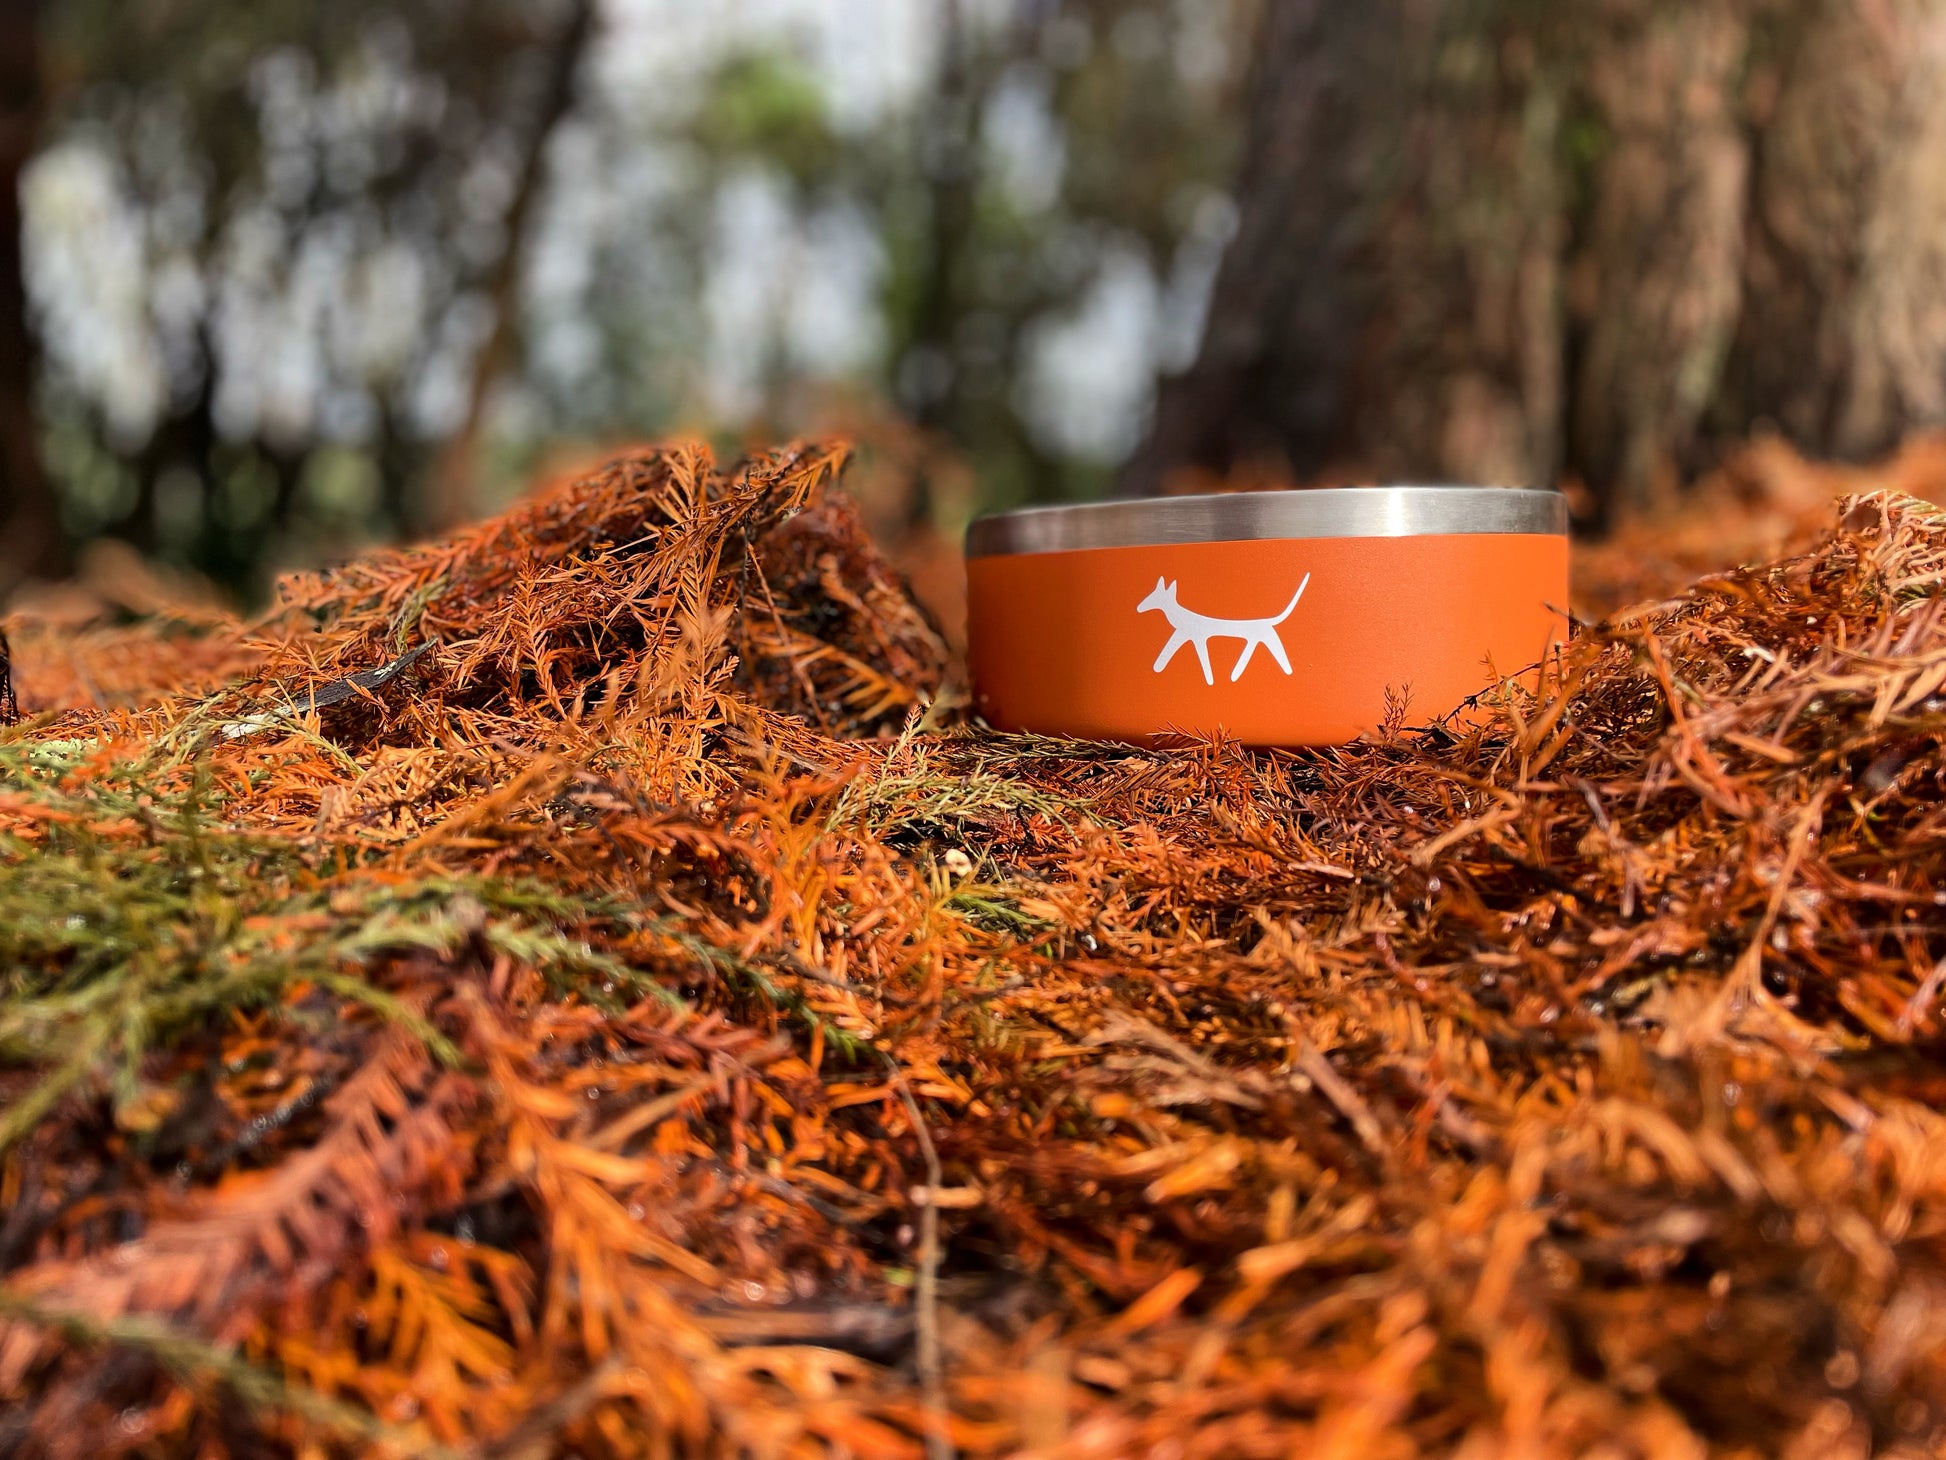 Stainless steel dog water bowl in rust colour with cream Droggo logo on the front. Dog bowl is in a forest ground where the orange and dry leaves matches with the bowl colour.